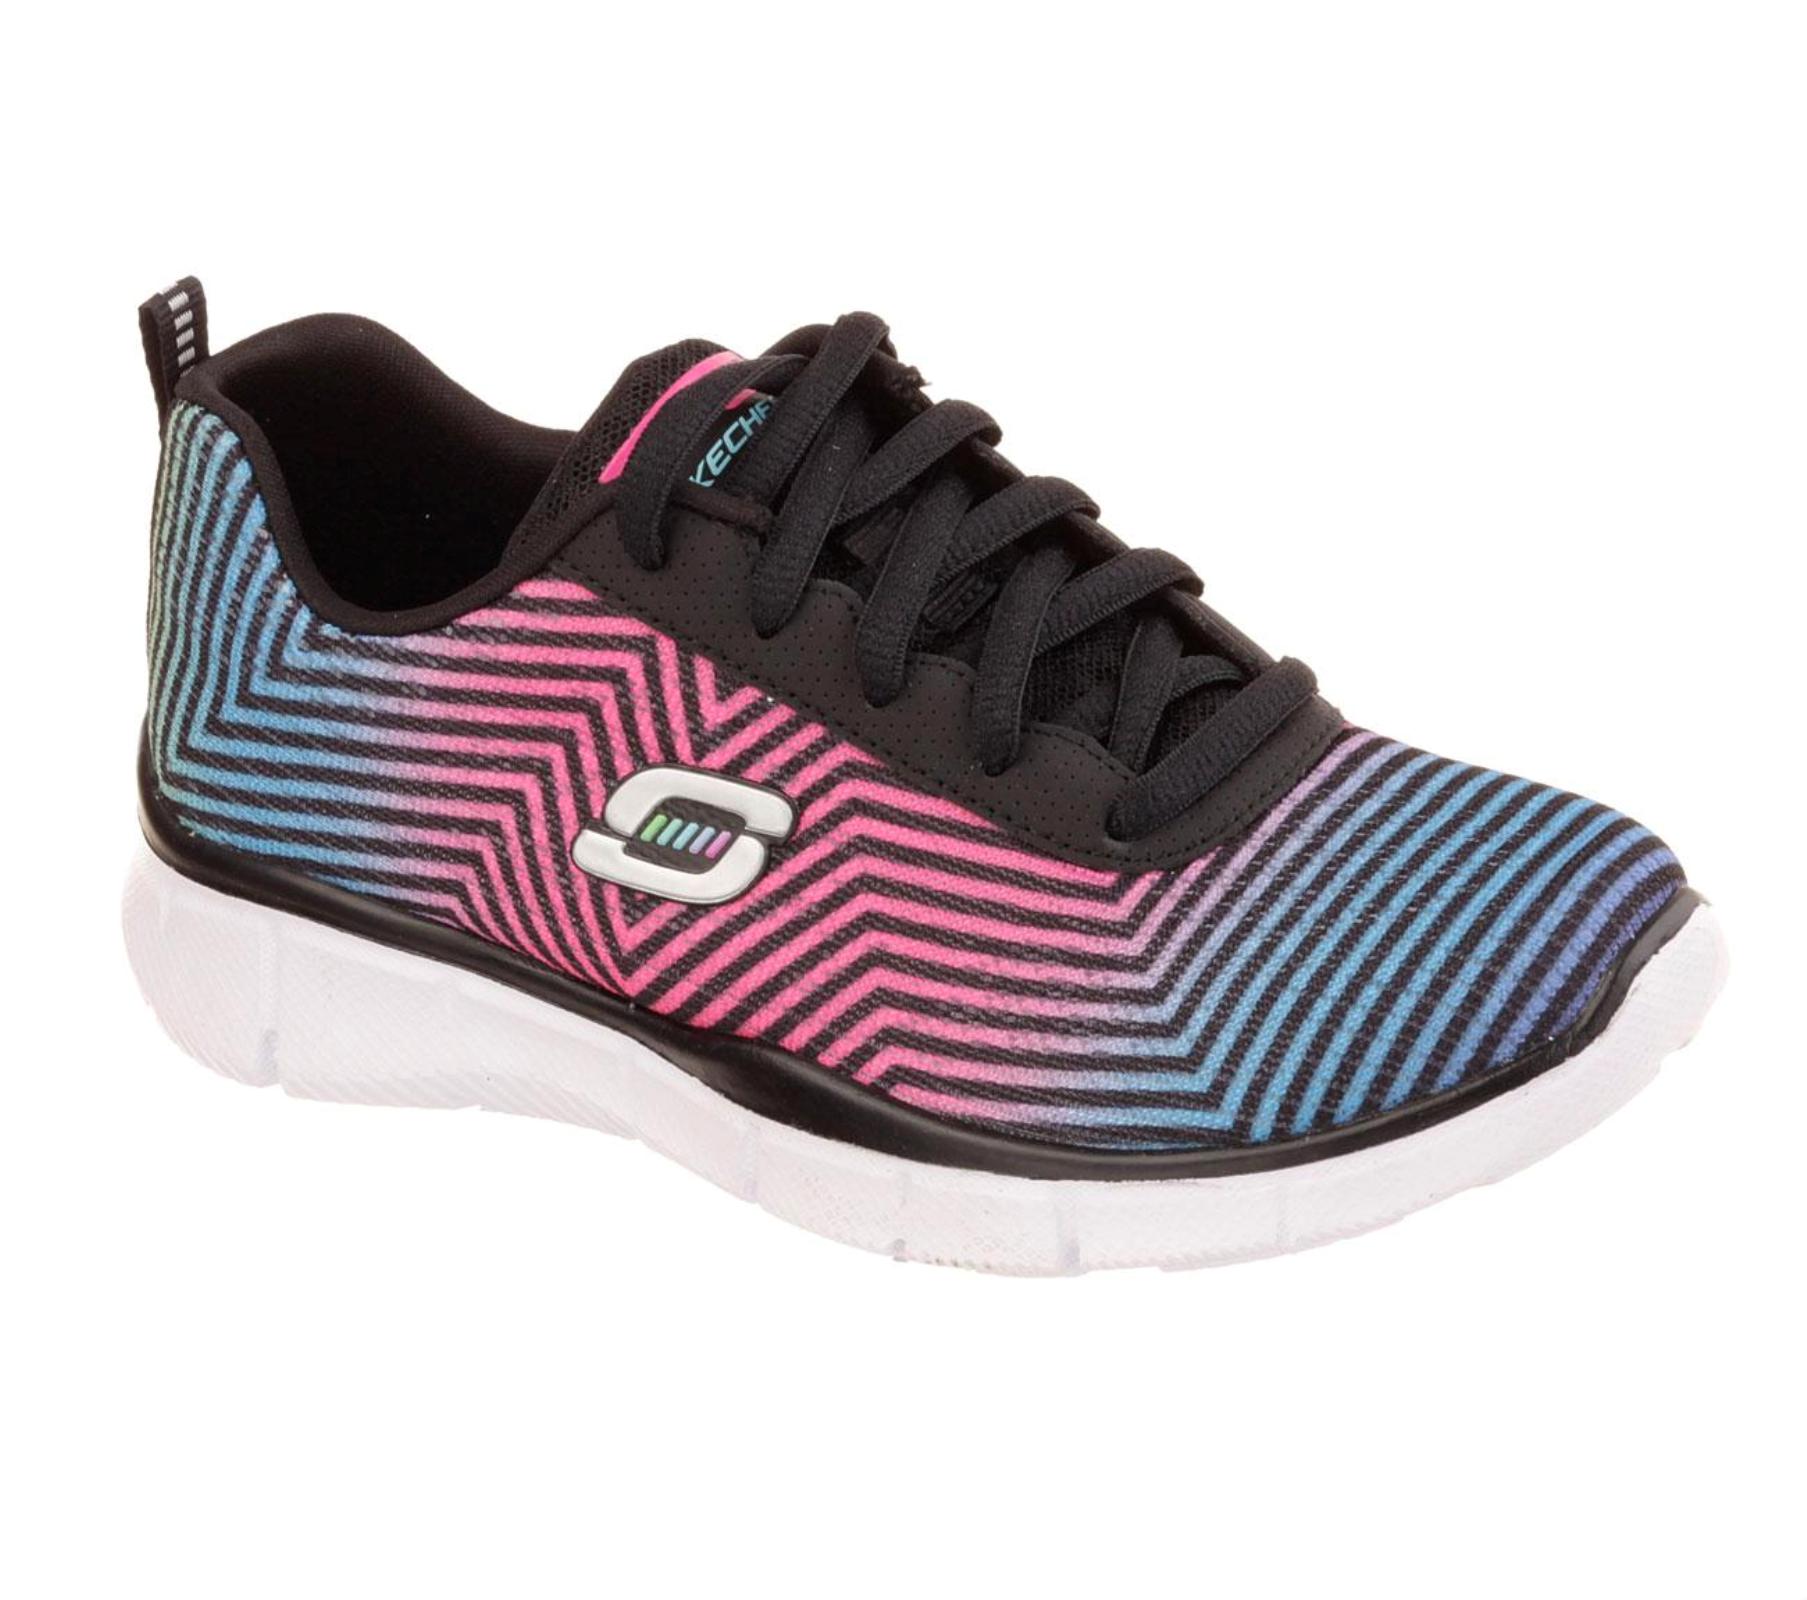 Skechers Girl's Expect Miracles Pink/Blue/Black Chevron Striped Athletic Shoe